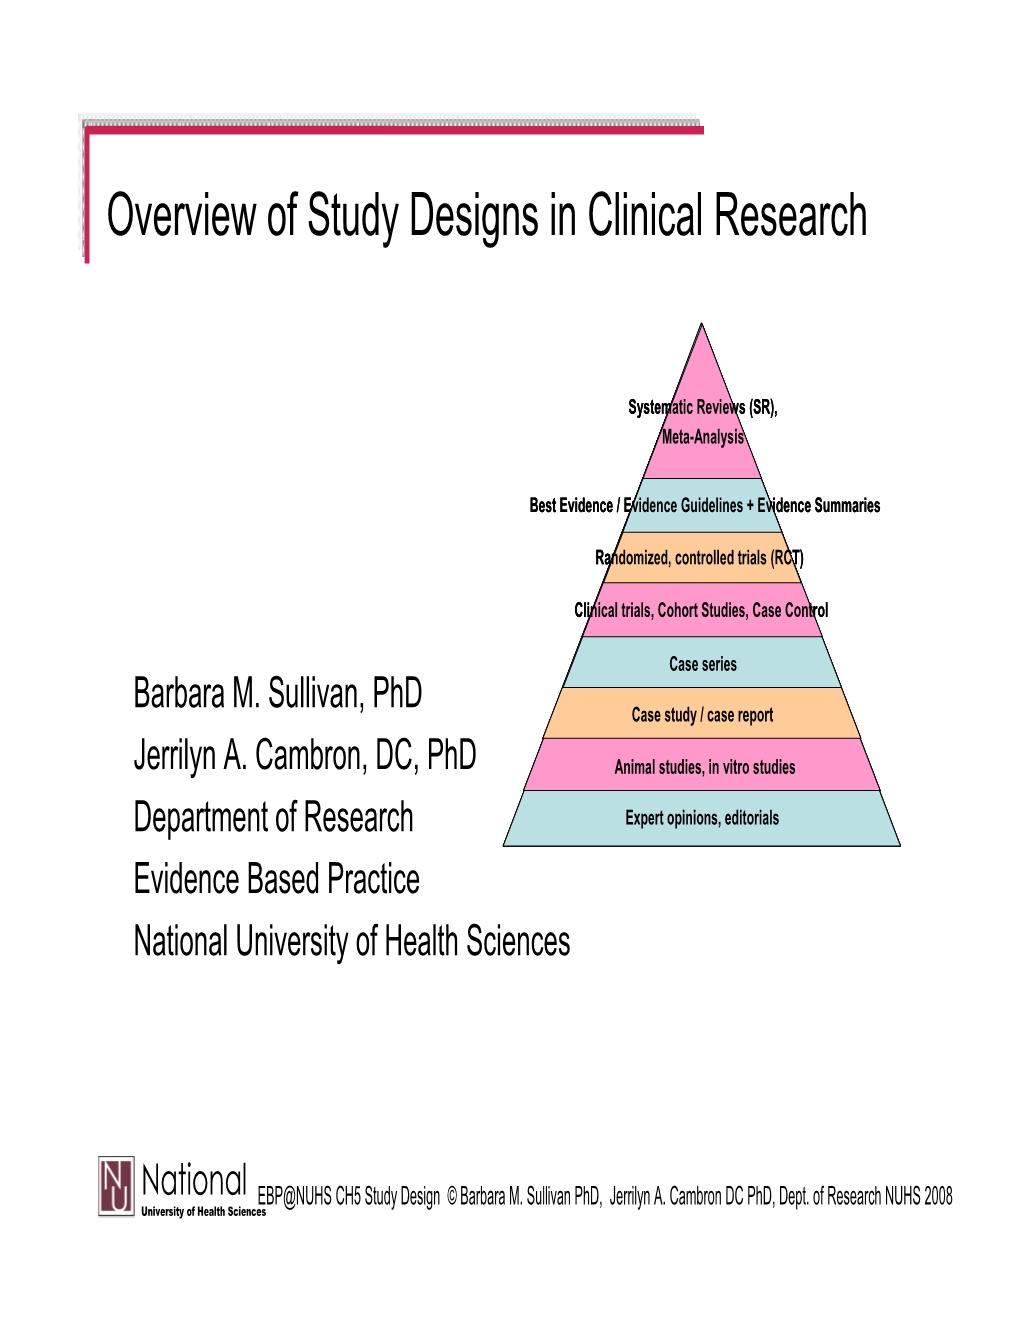 Overview of Study Designs in Clinical Research